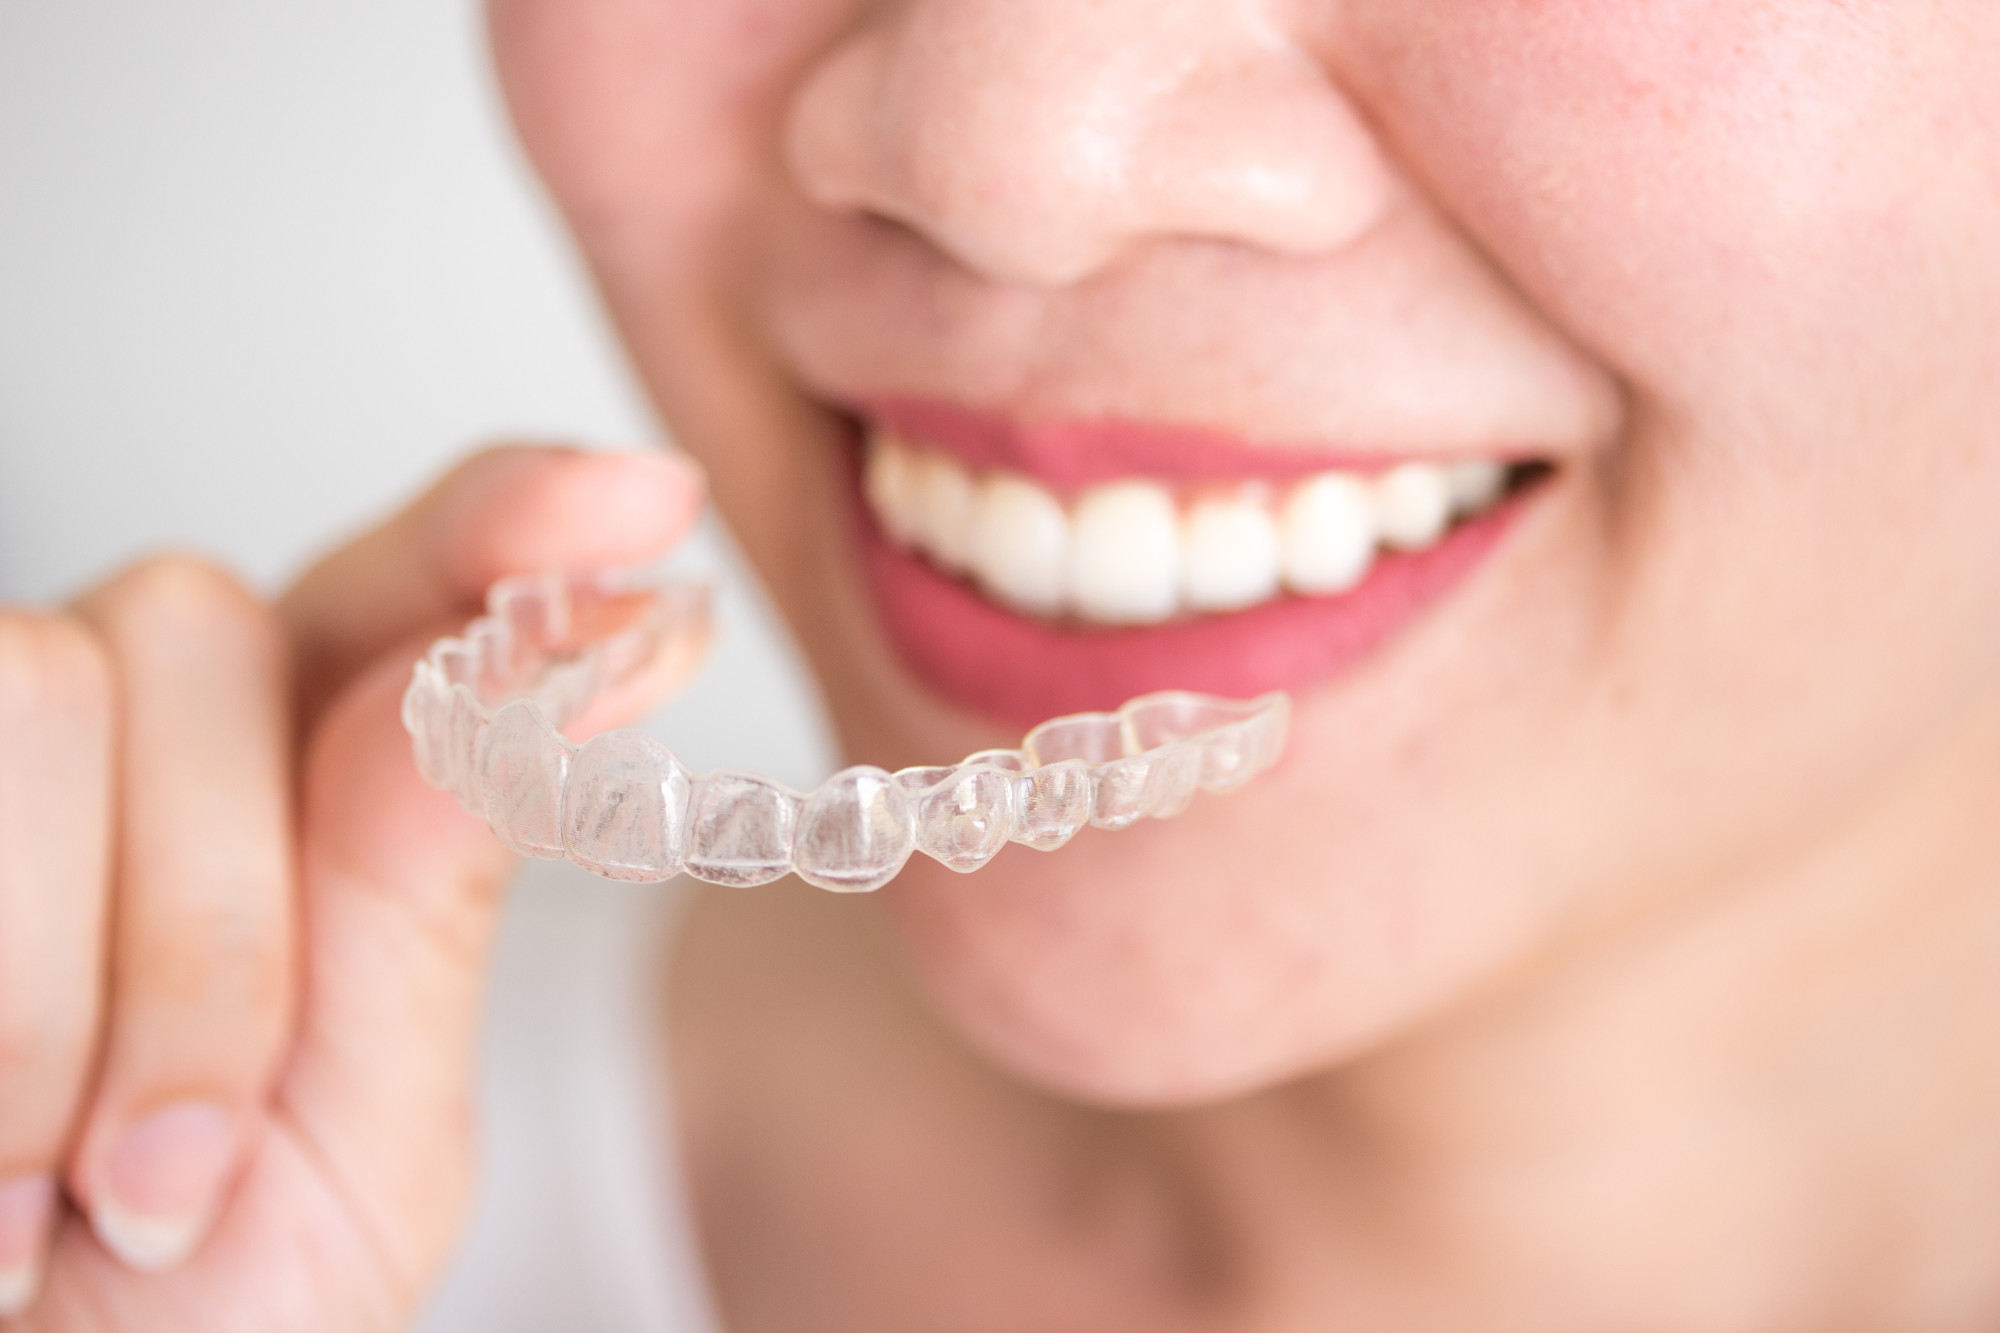 Invisalign is an easy and cost-effective way to straighten your teeth. Check out this quick guide to the benefits of Invisalign.